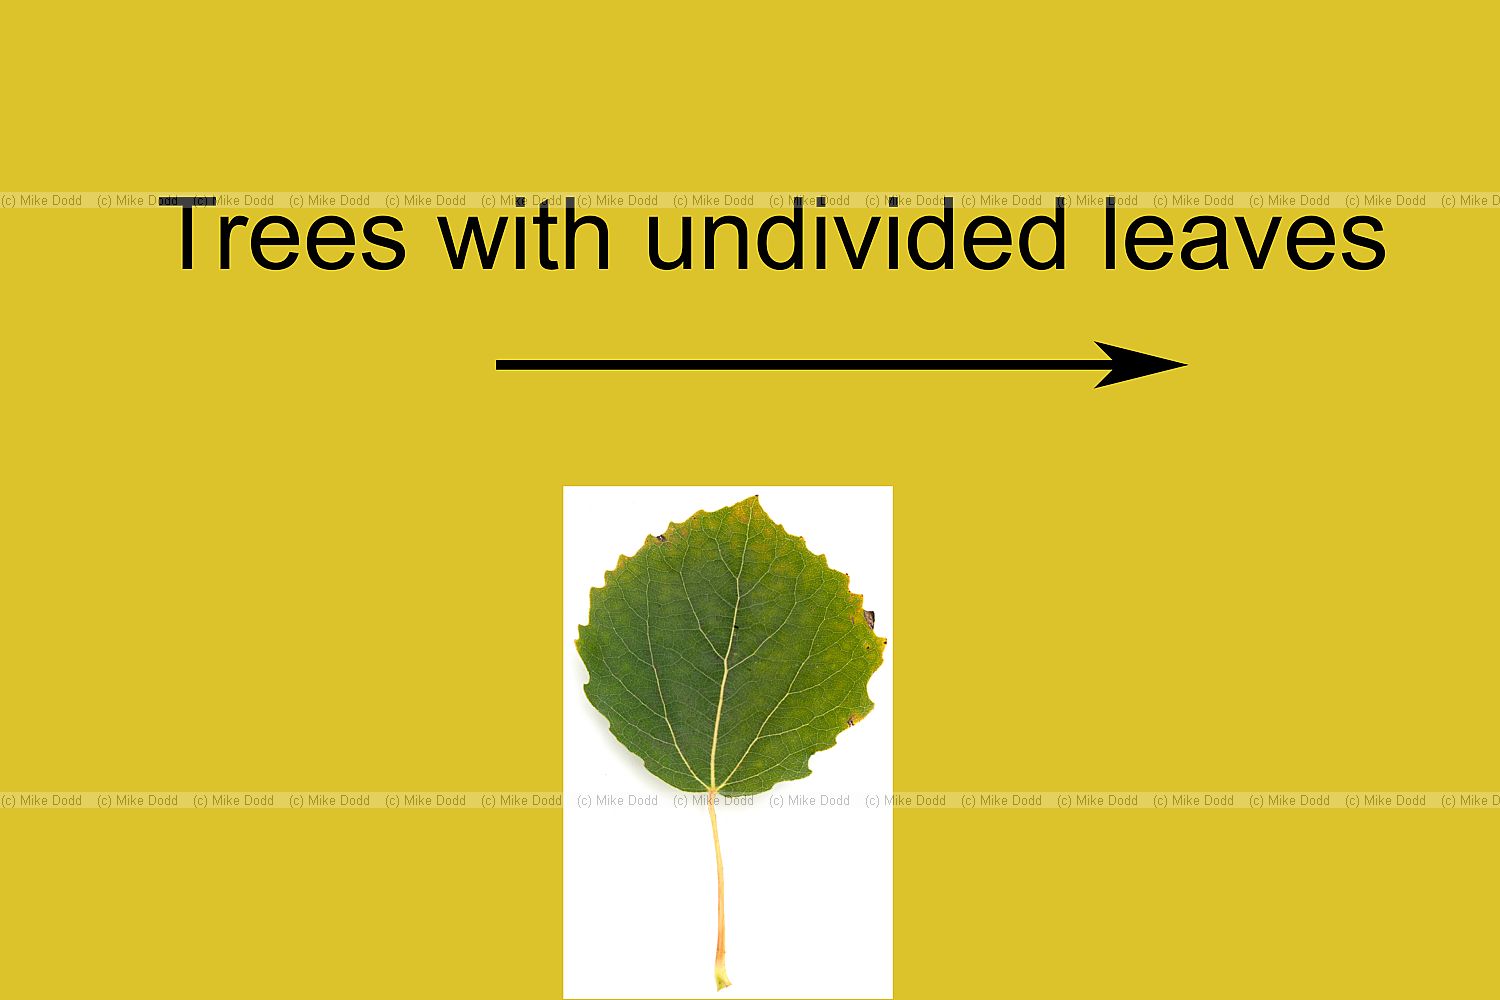 Trees with undivided leaves